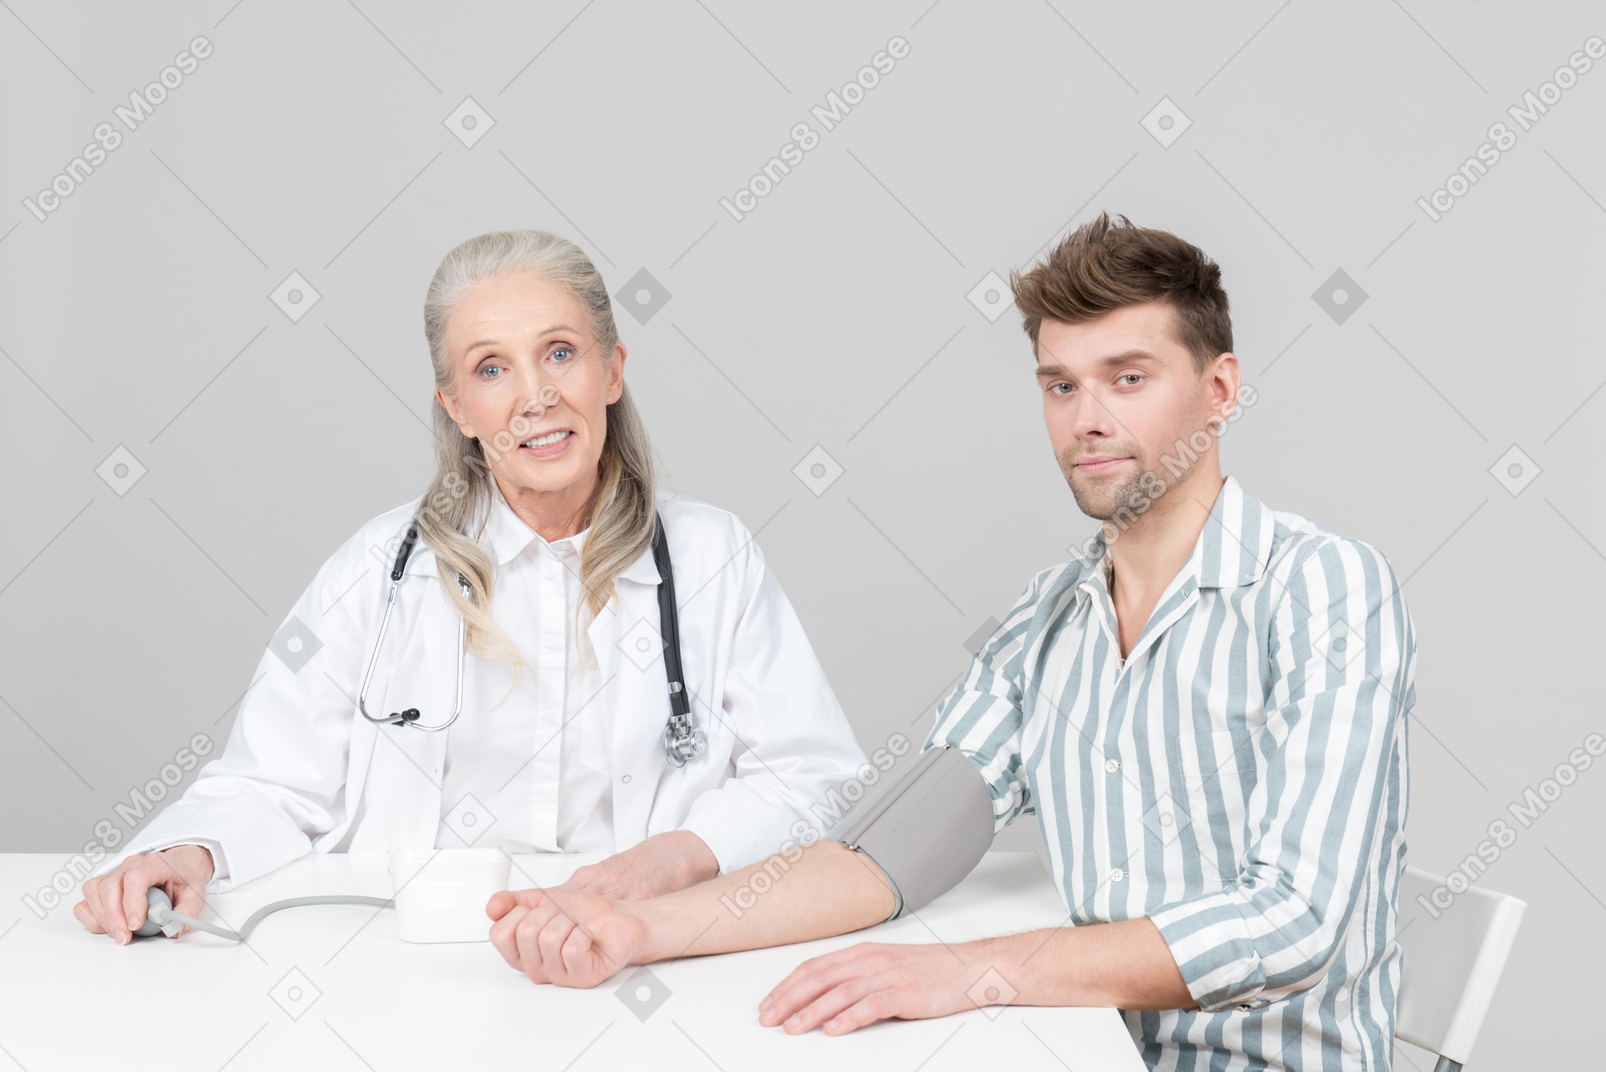 Aged female doctor checking a young man's blood pressure